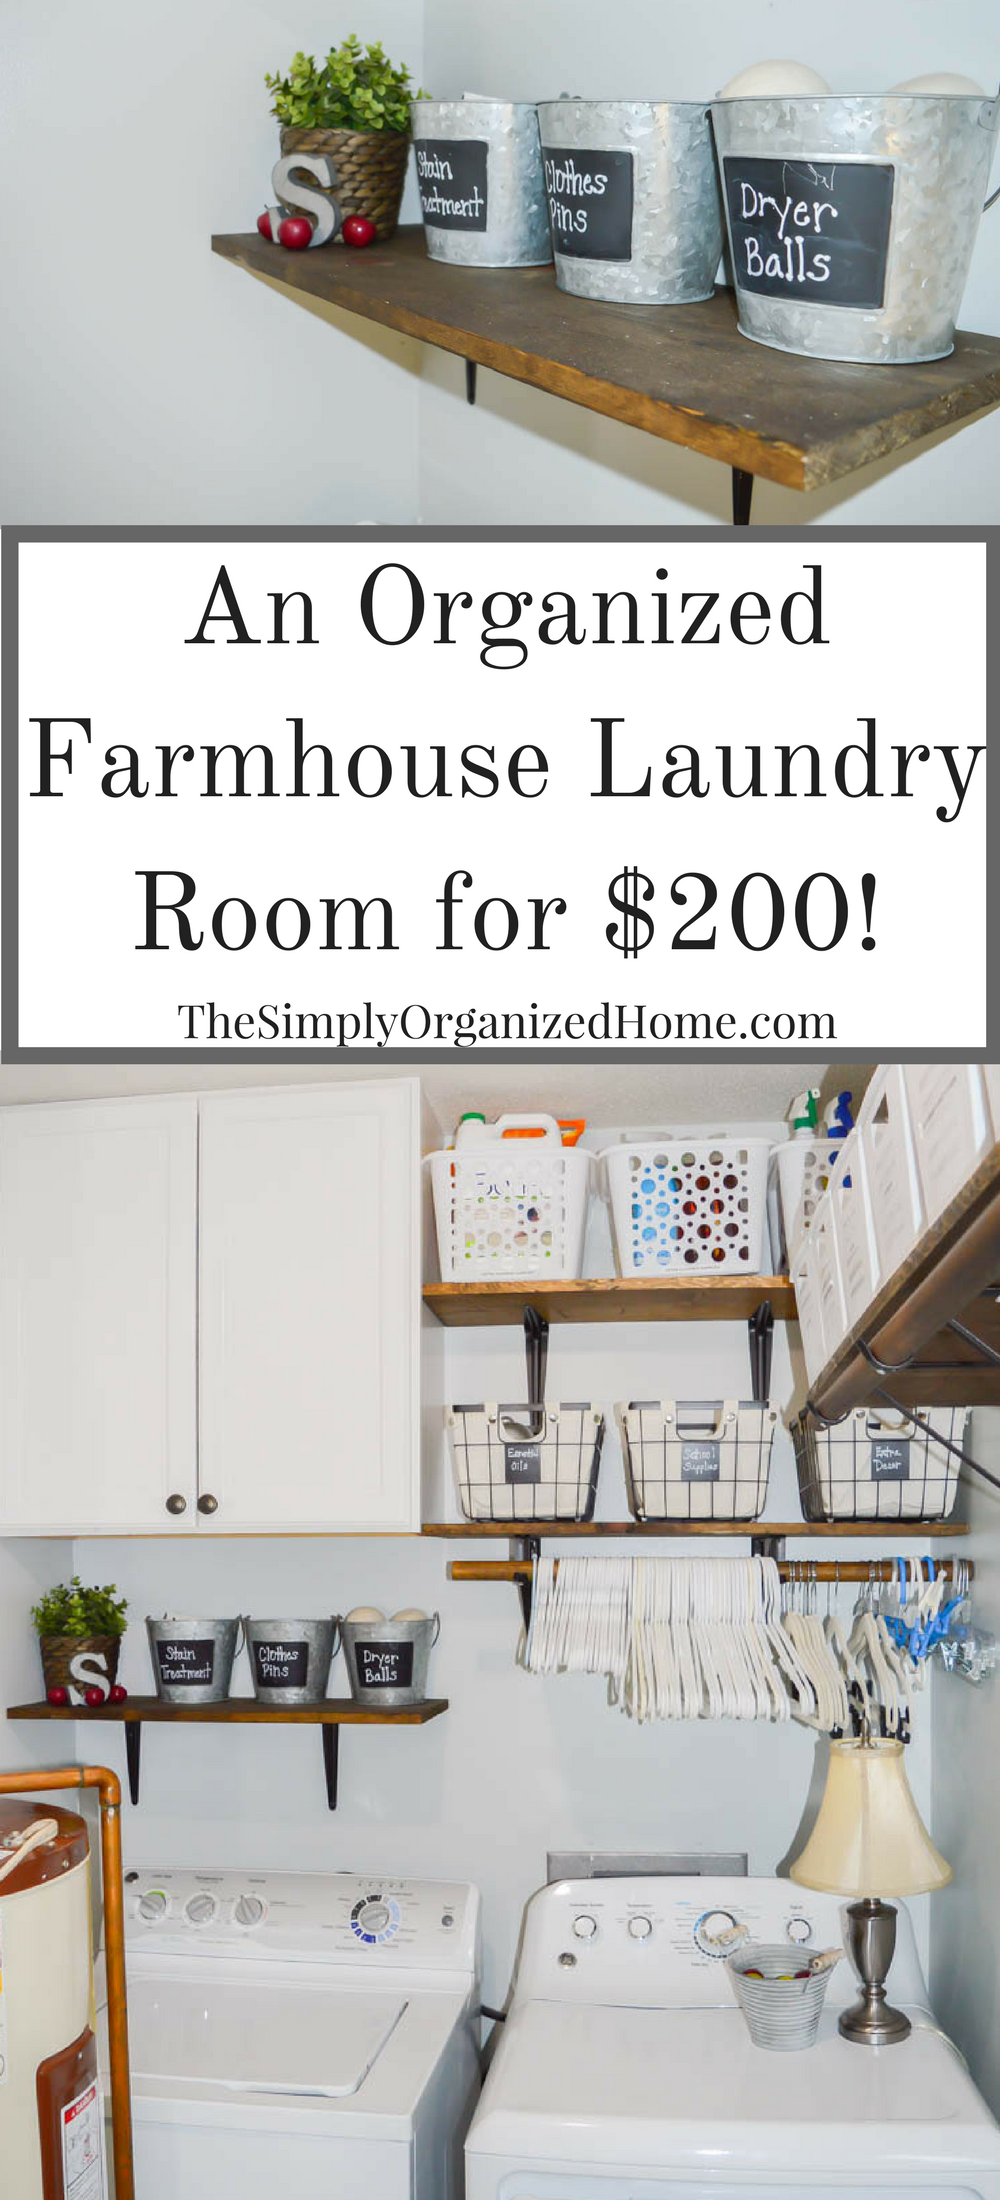 https://www.thesimplyorganizedhome.com/wp-content/uploads/2017/02/Organized-Farmhouse-Laundry-Room.png